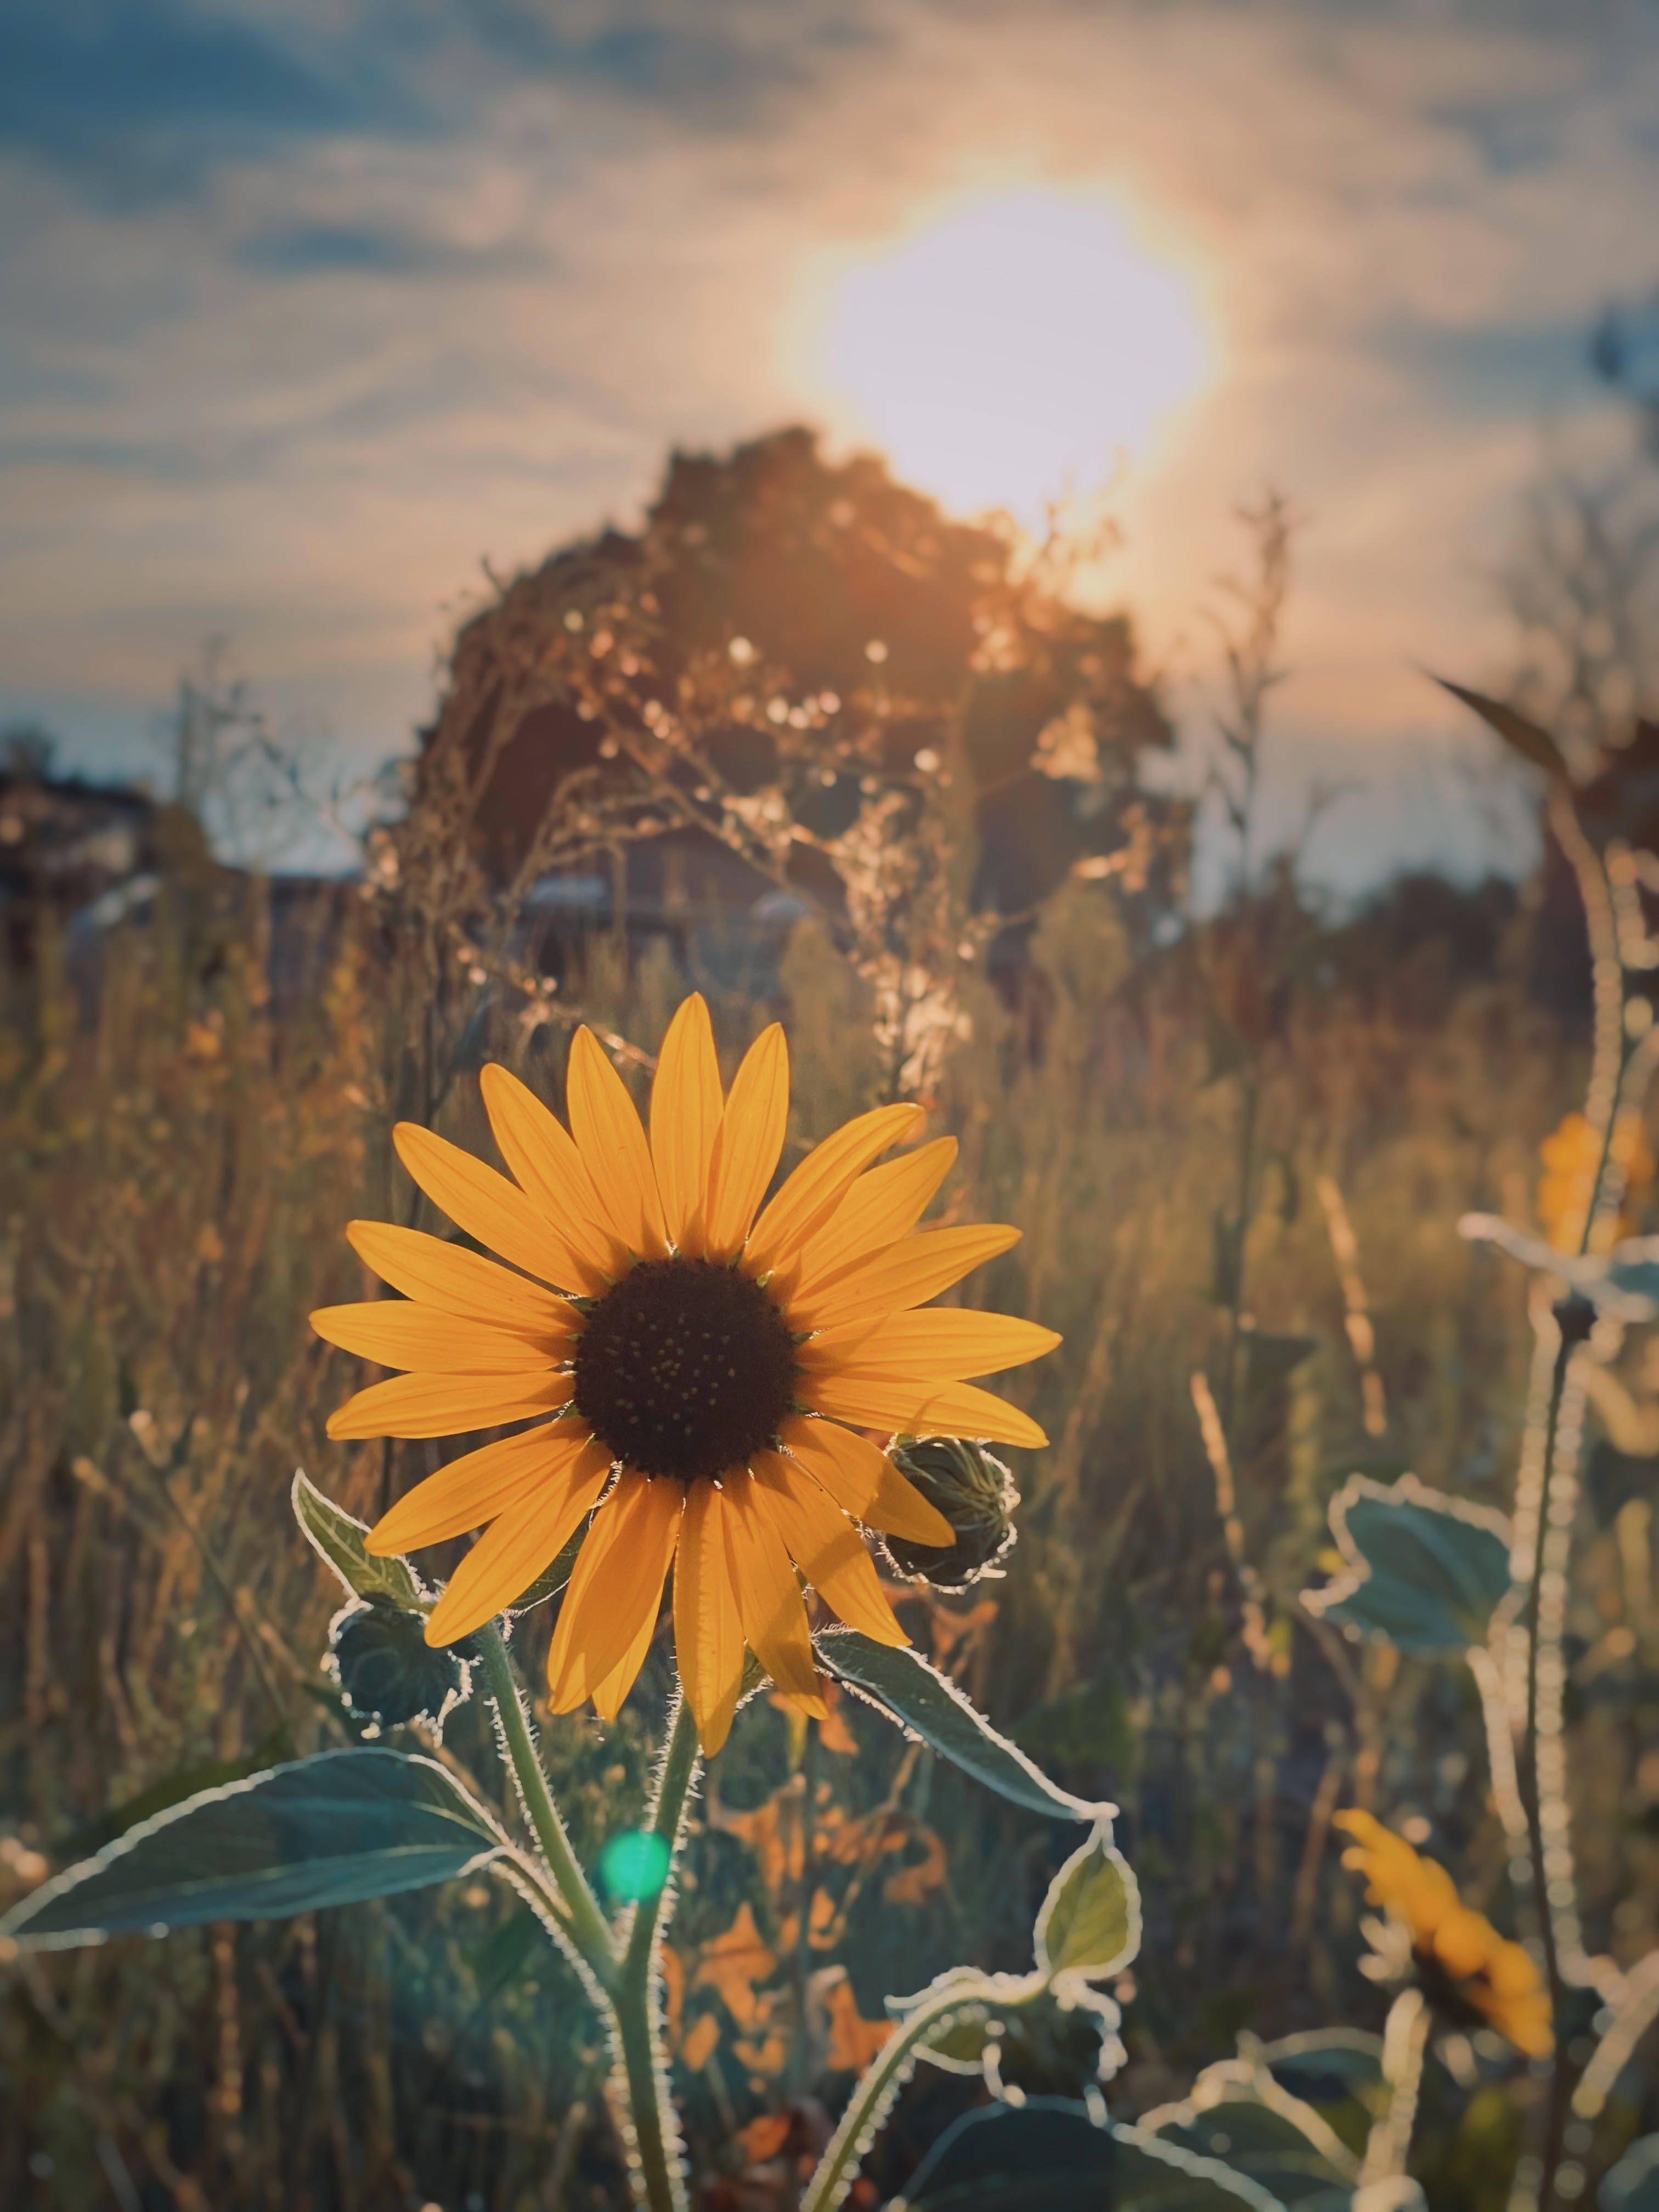 A sunflower in a field with the sun in the background. - Sun, sunlight